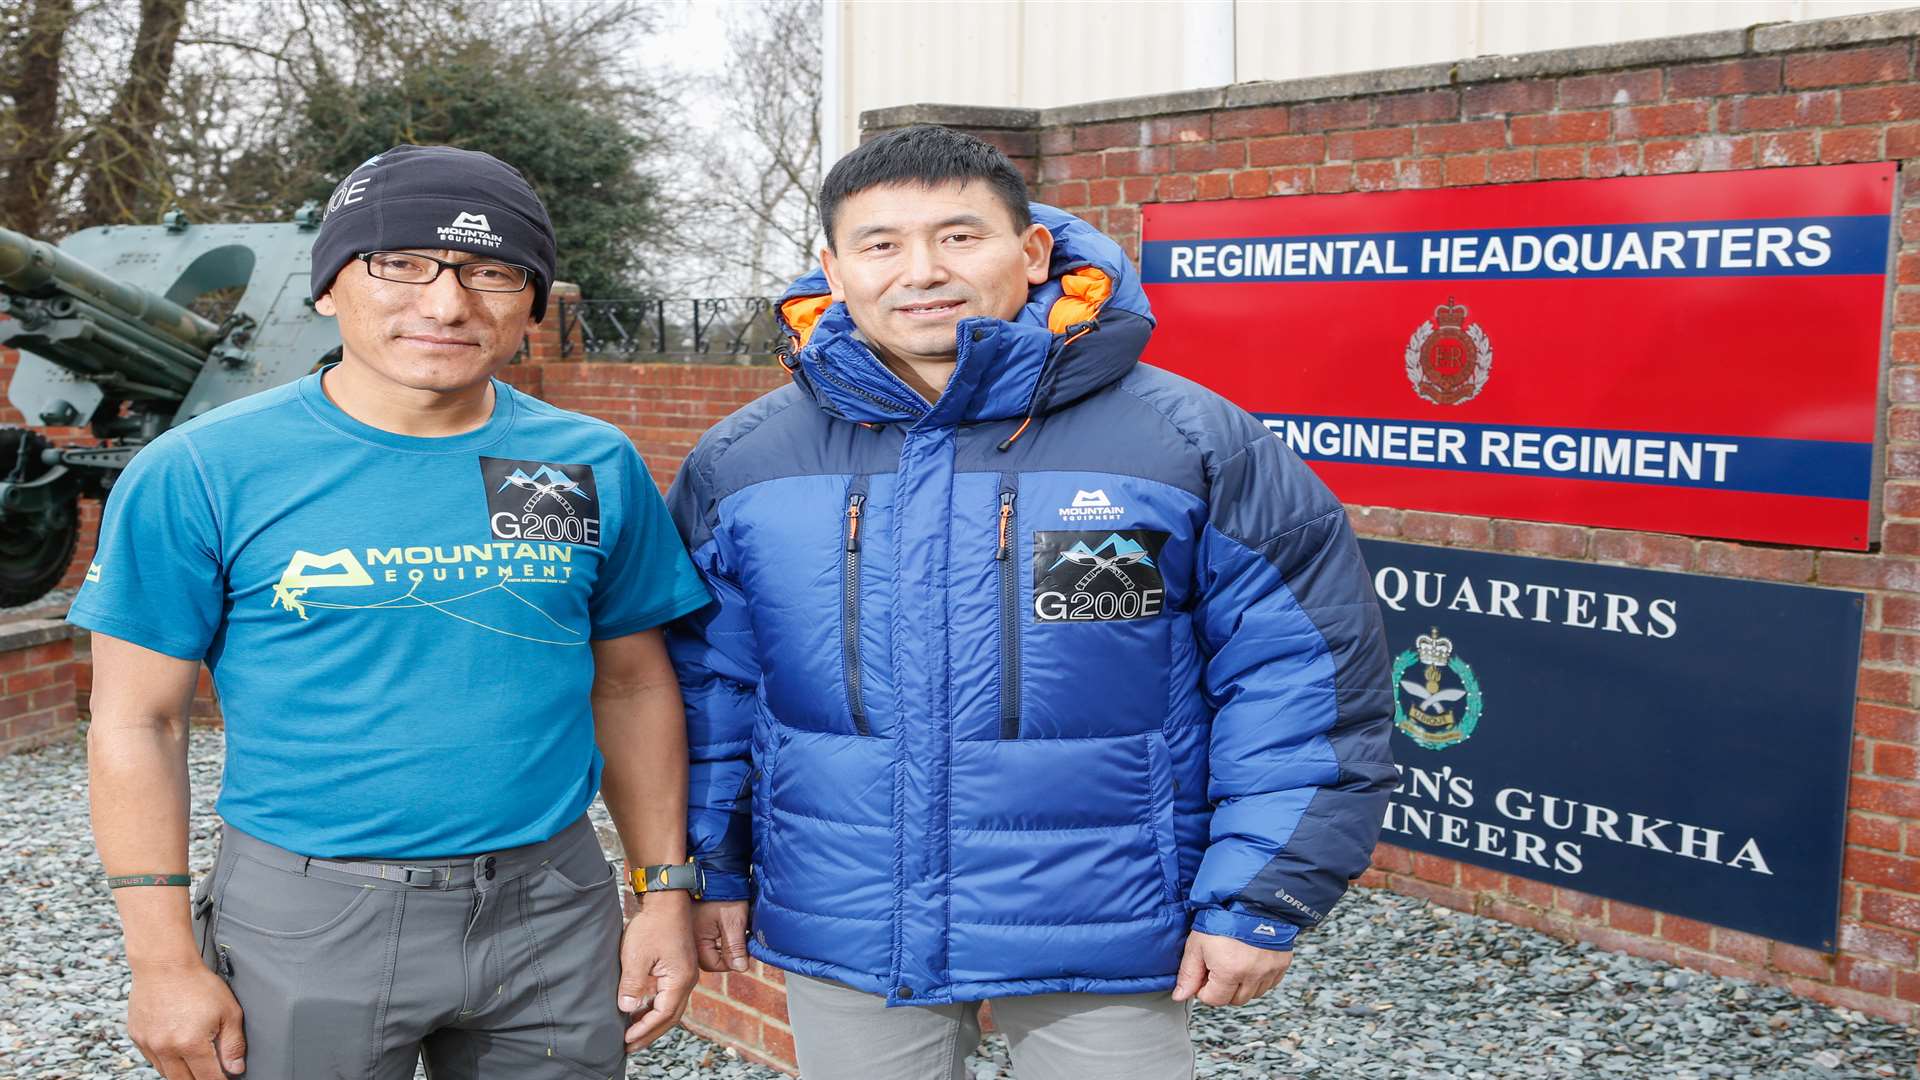 WO2 (SSM) Govinda Bahadur Rana and SGT Pasany Sherpa before they left for an expedition to climb Everest